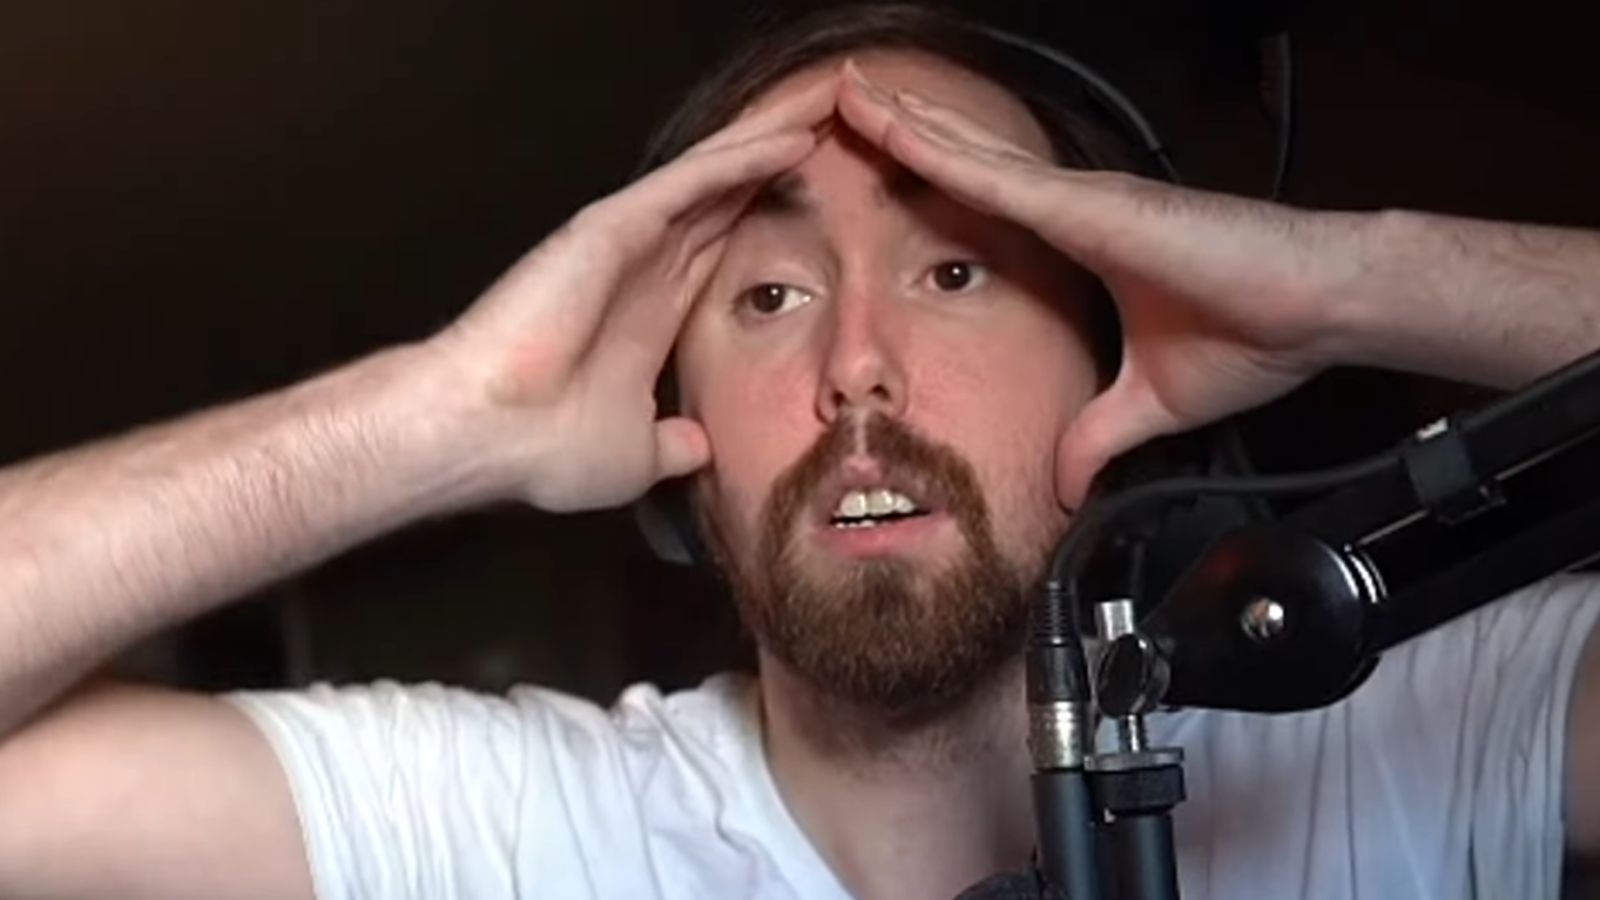 Asmongold left stunned after Diablo 4 bug deletes his character during stream – Dexerto